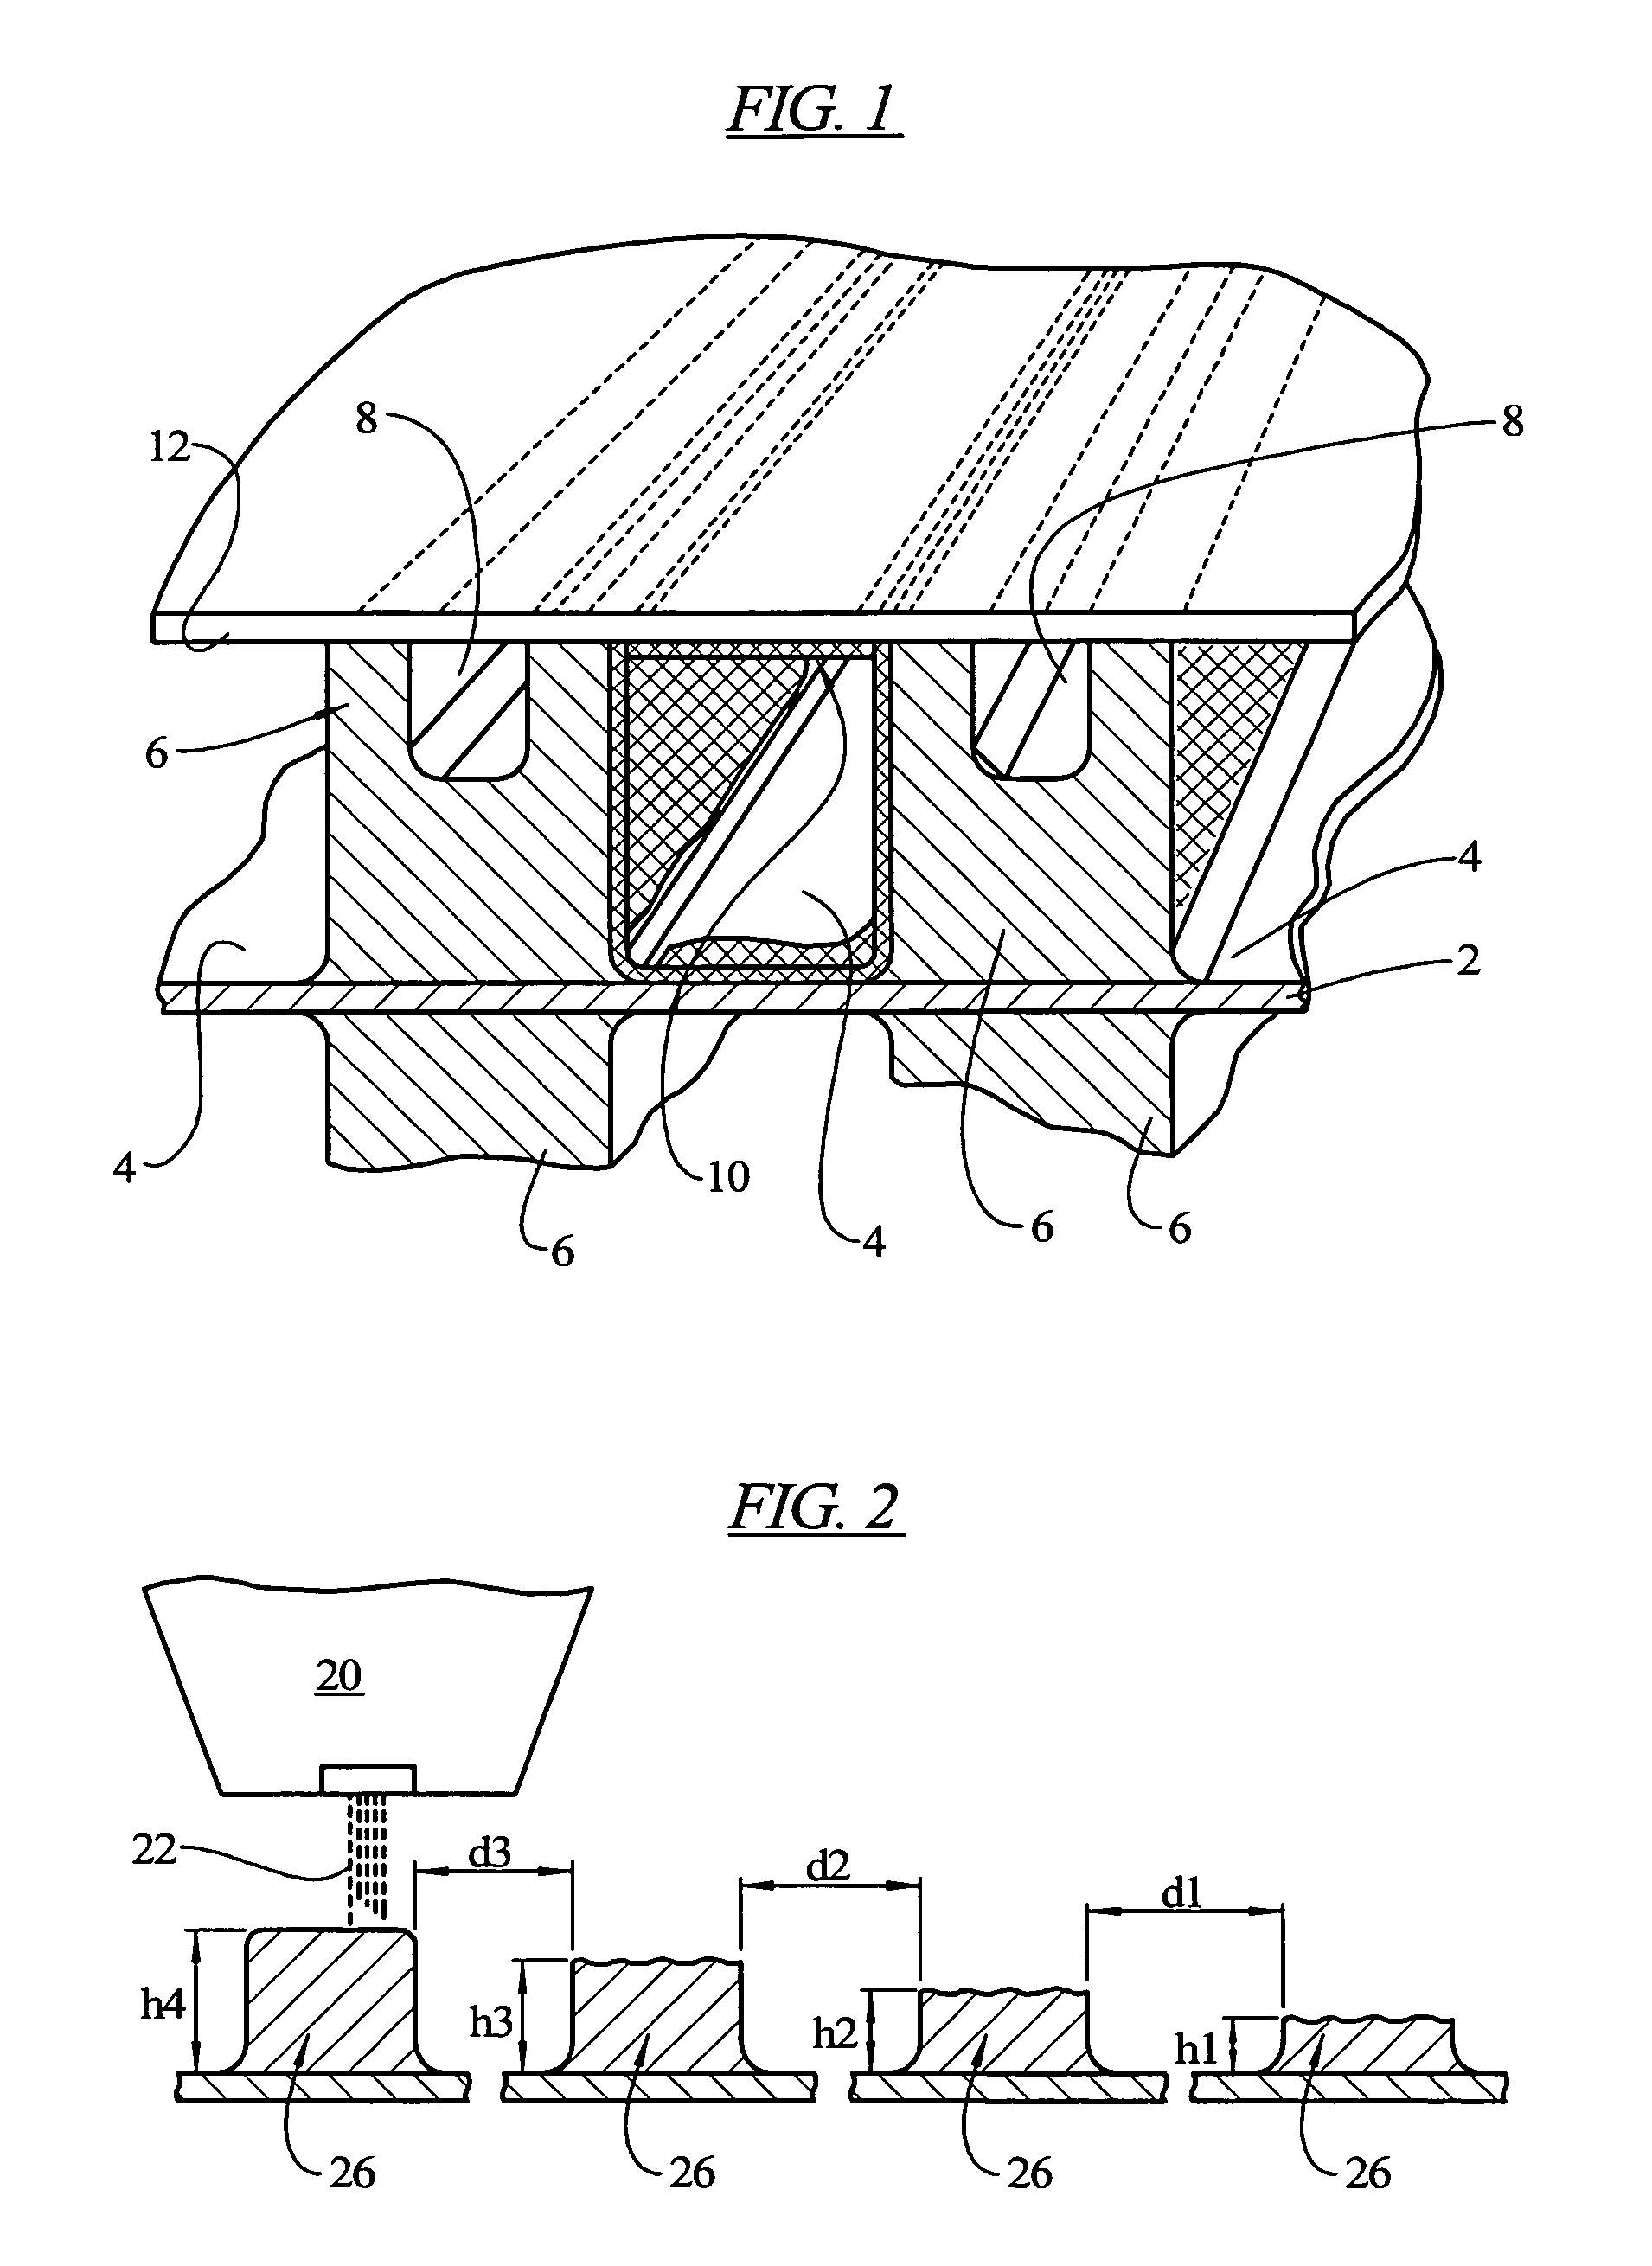 Methods for manufacturing electrochemical cell parts comprising material deposition processes